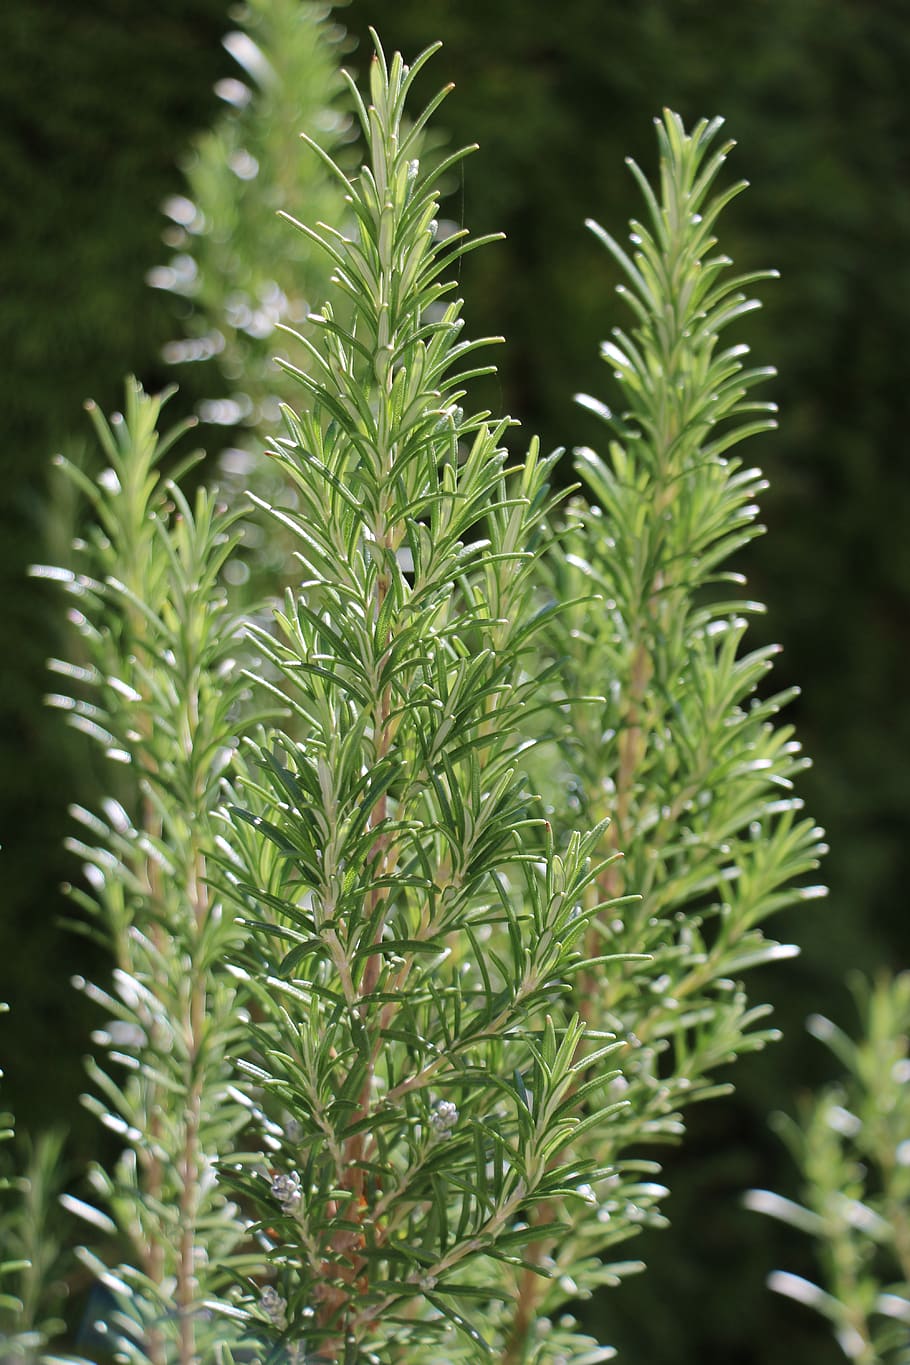 rosemary, garden, herbs, bush, growth, plant, green color, leaf, close-up, plant part